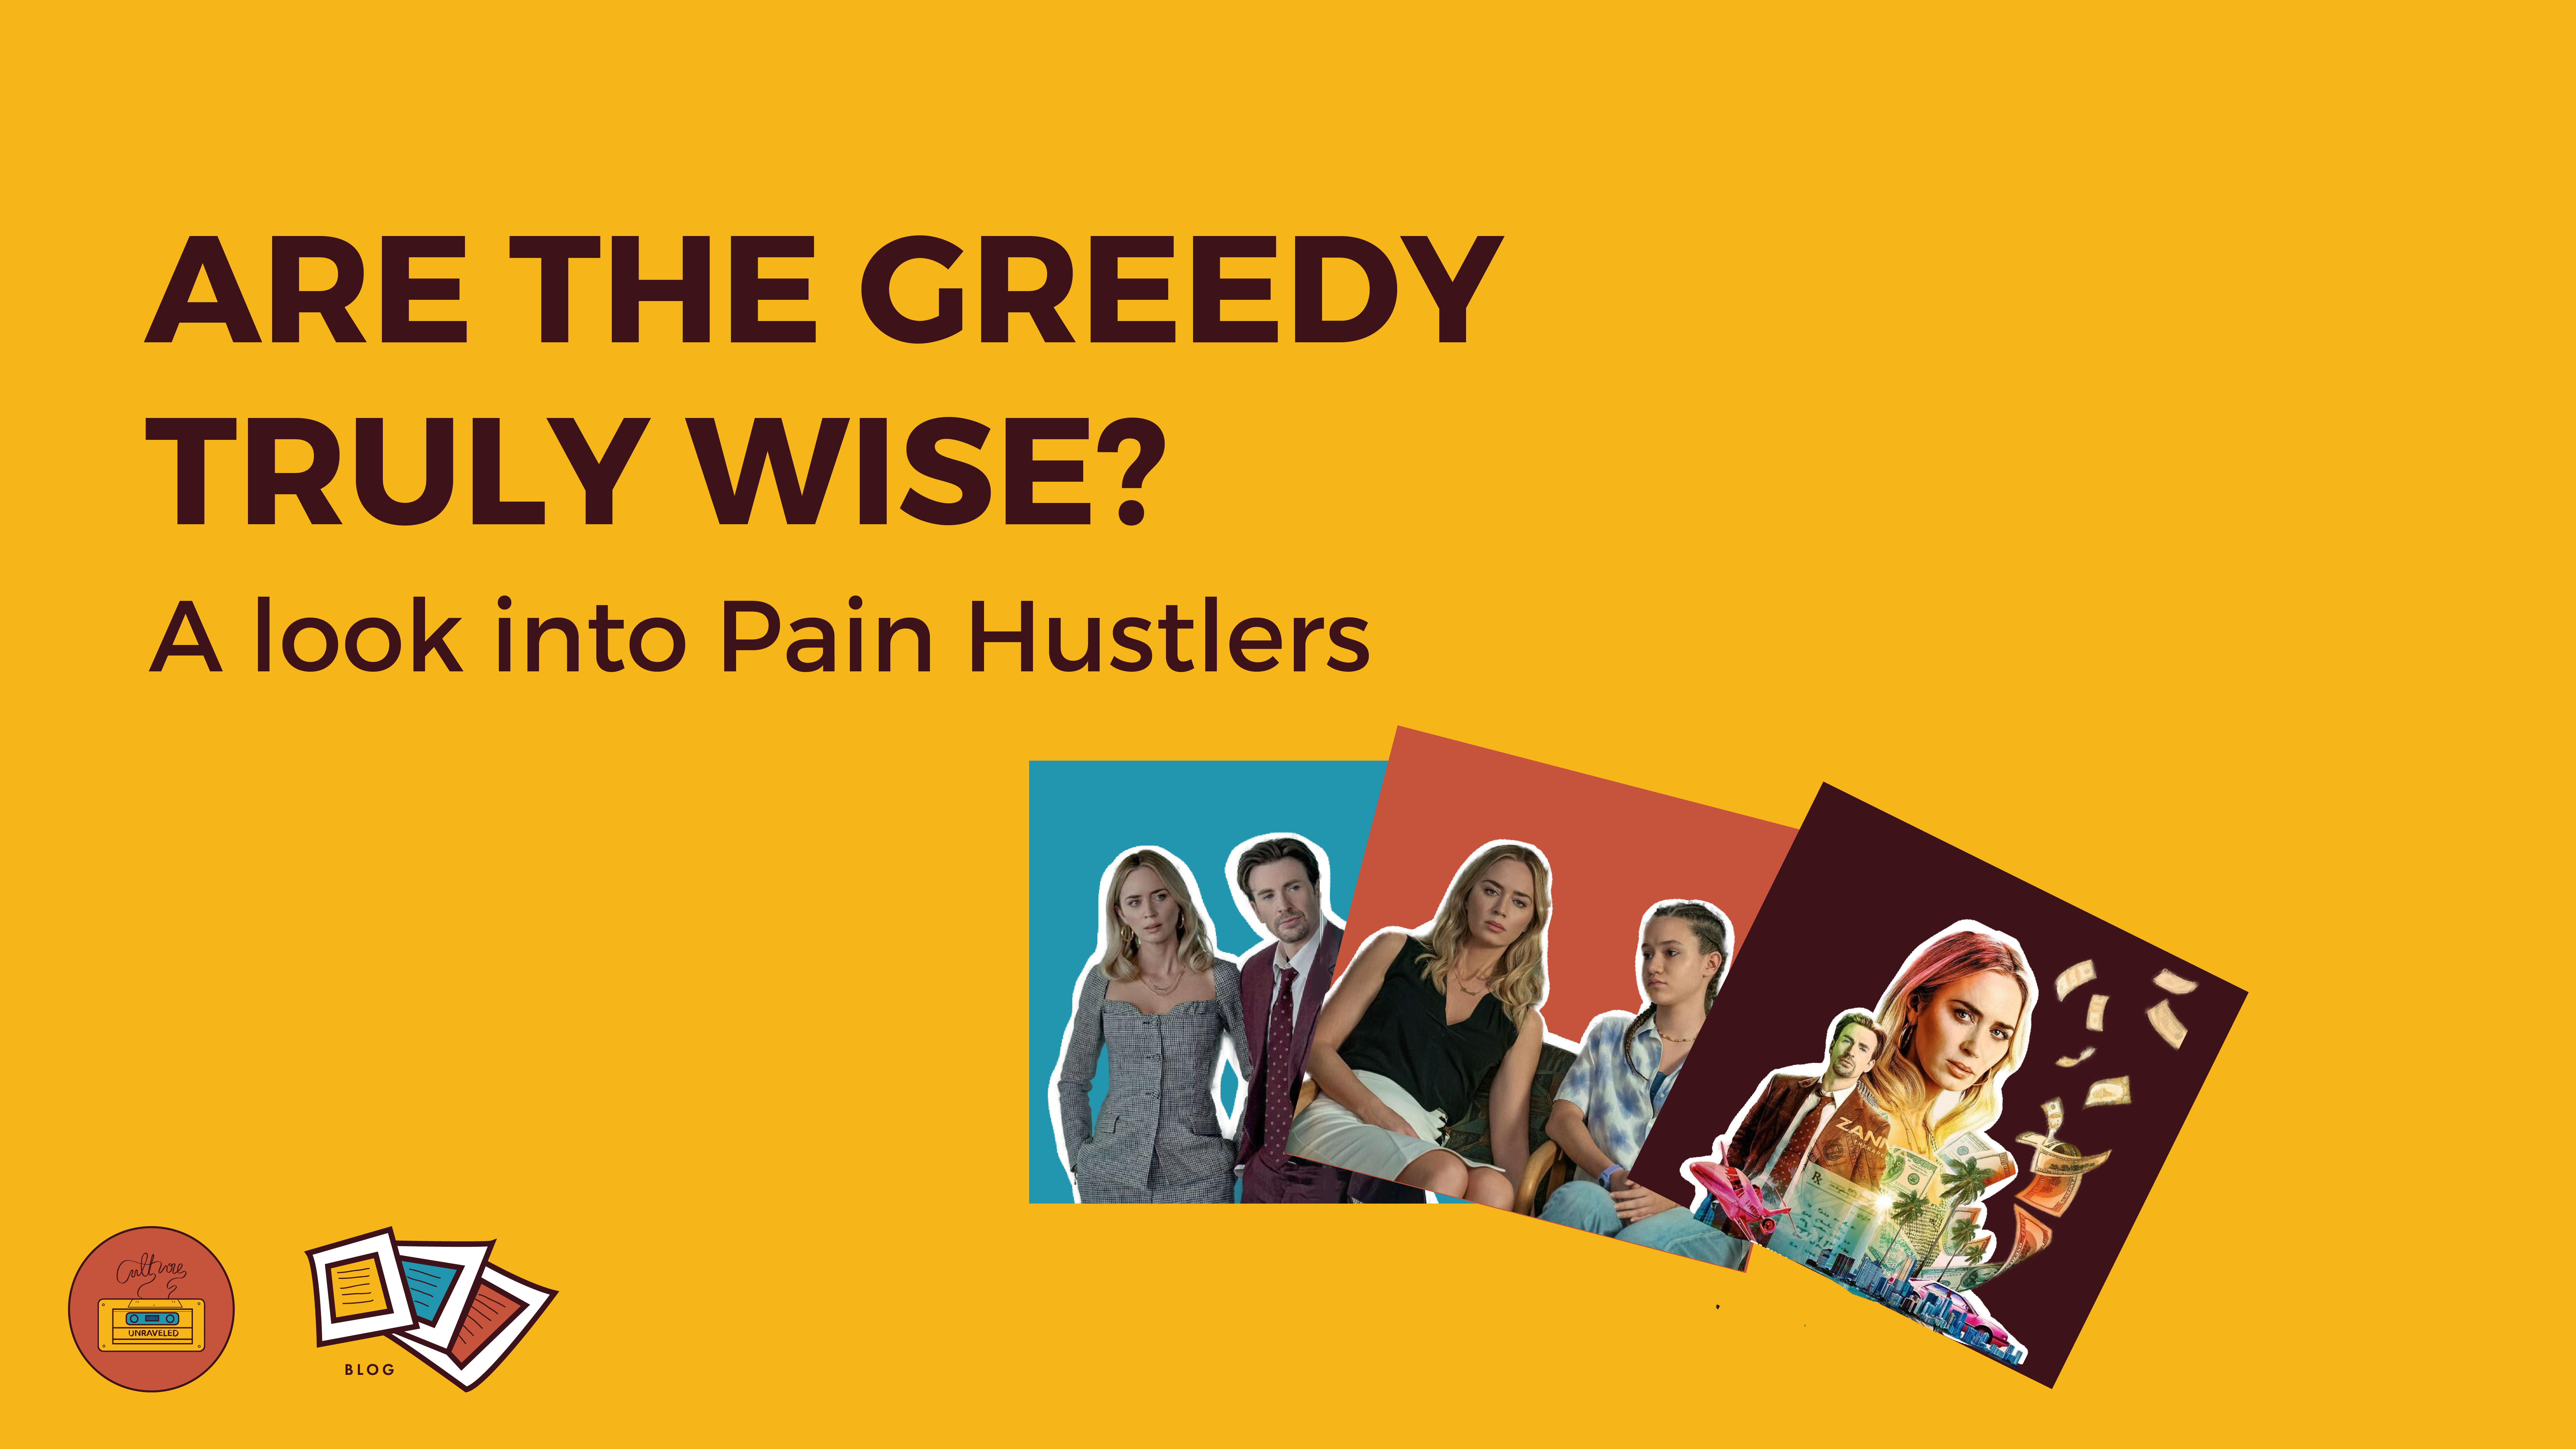 Are the Greedy Truly Wise? A look Into Pain Hustlers